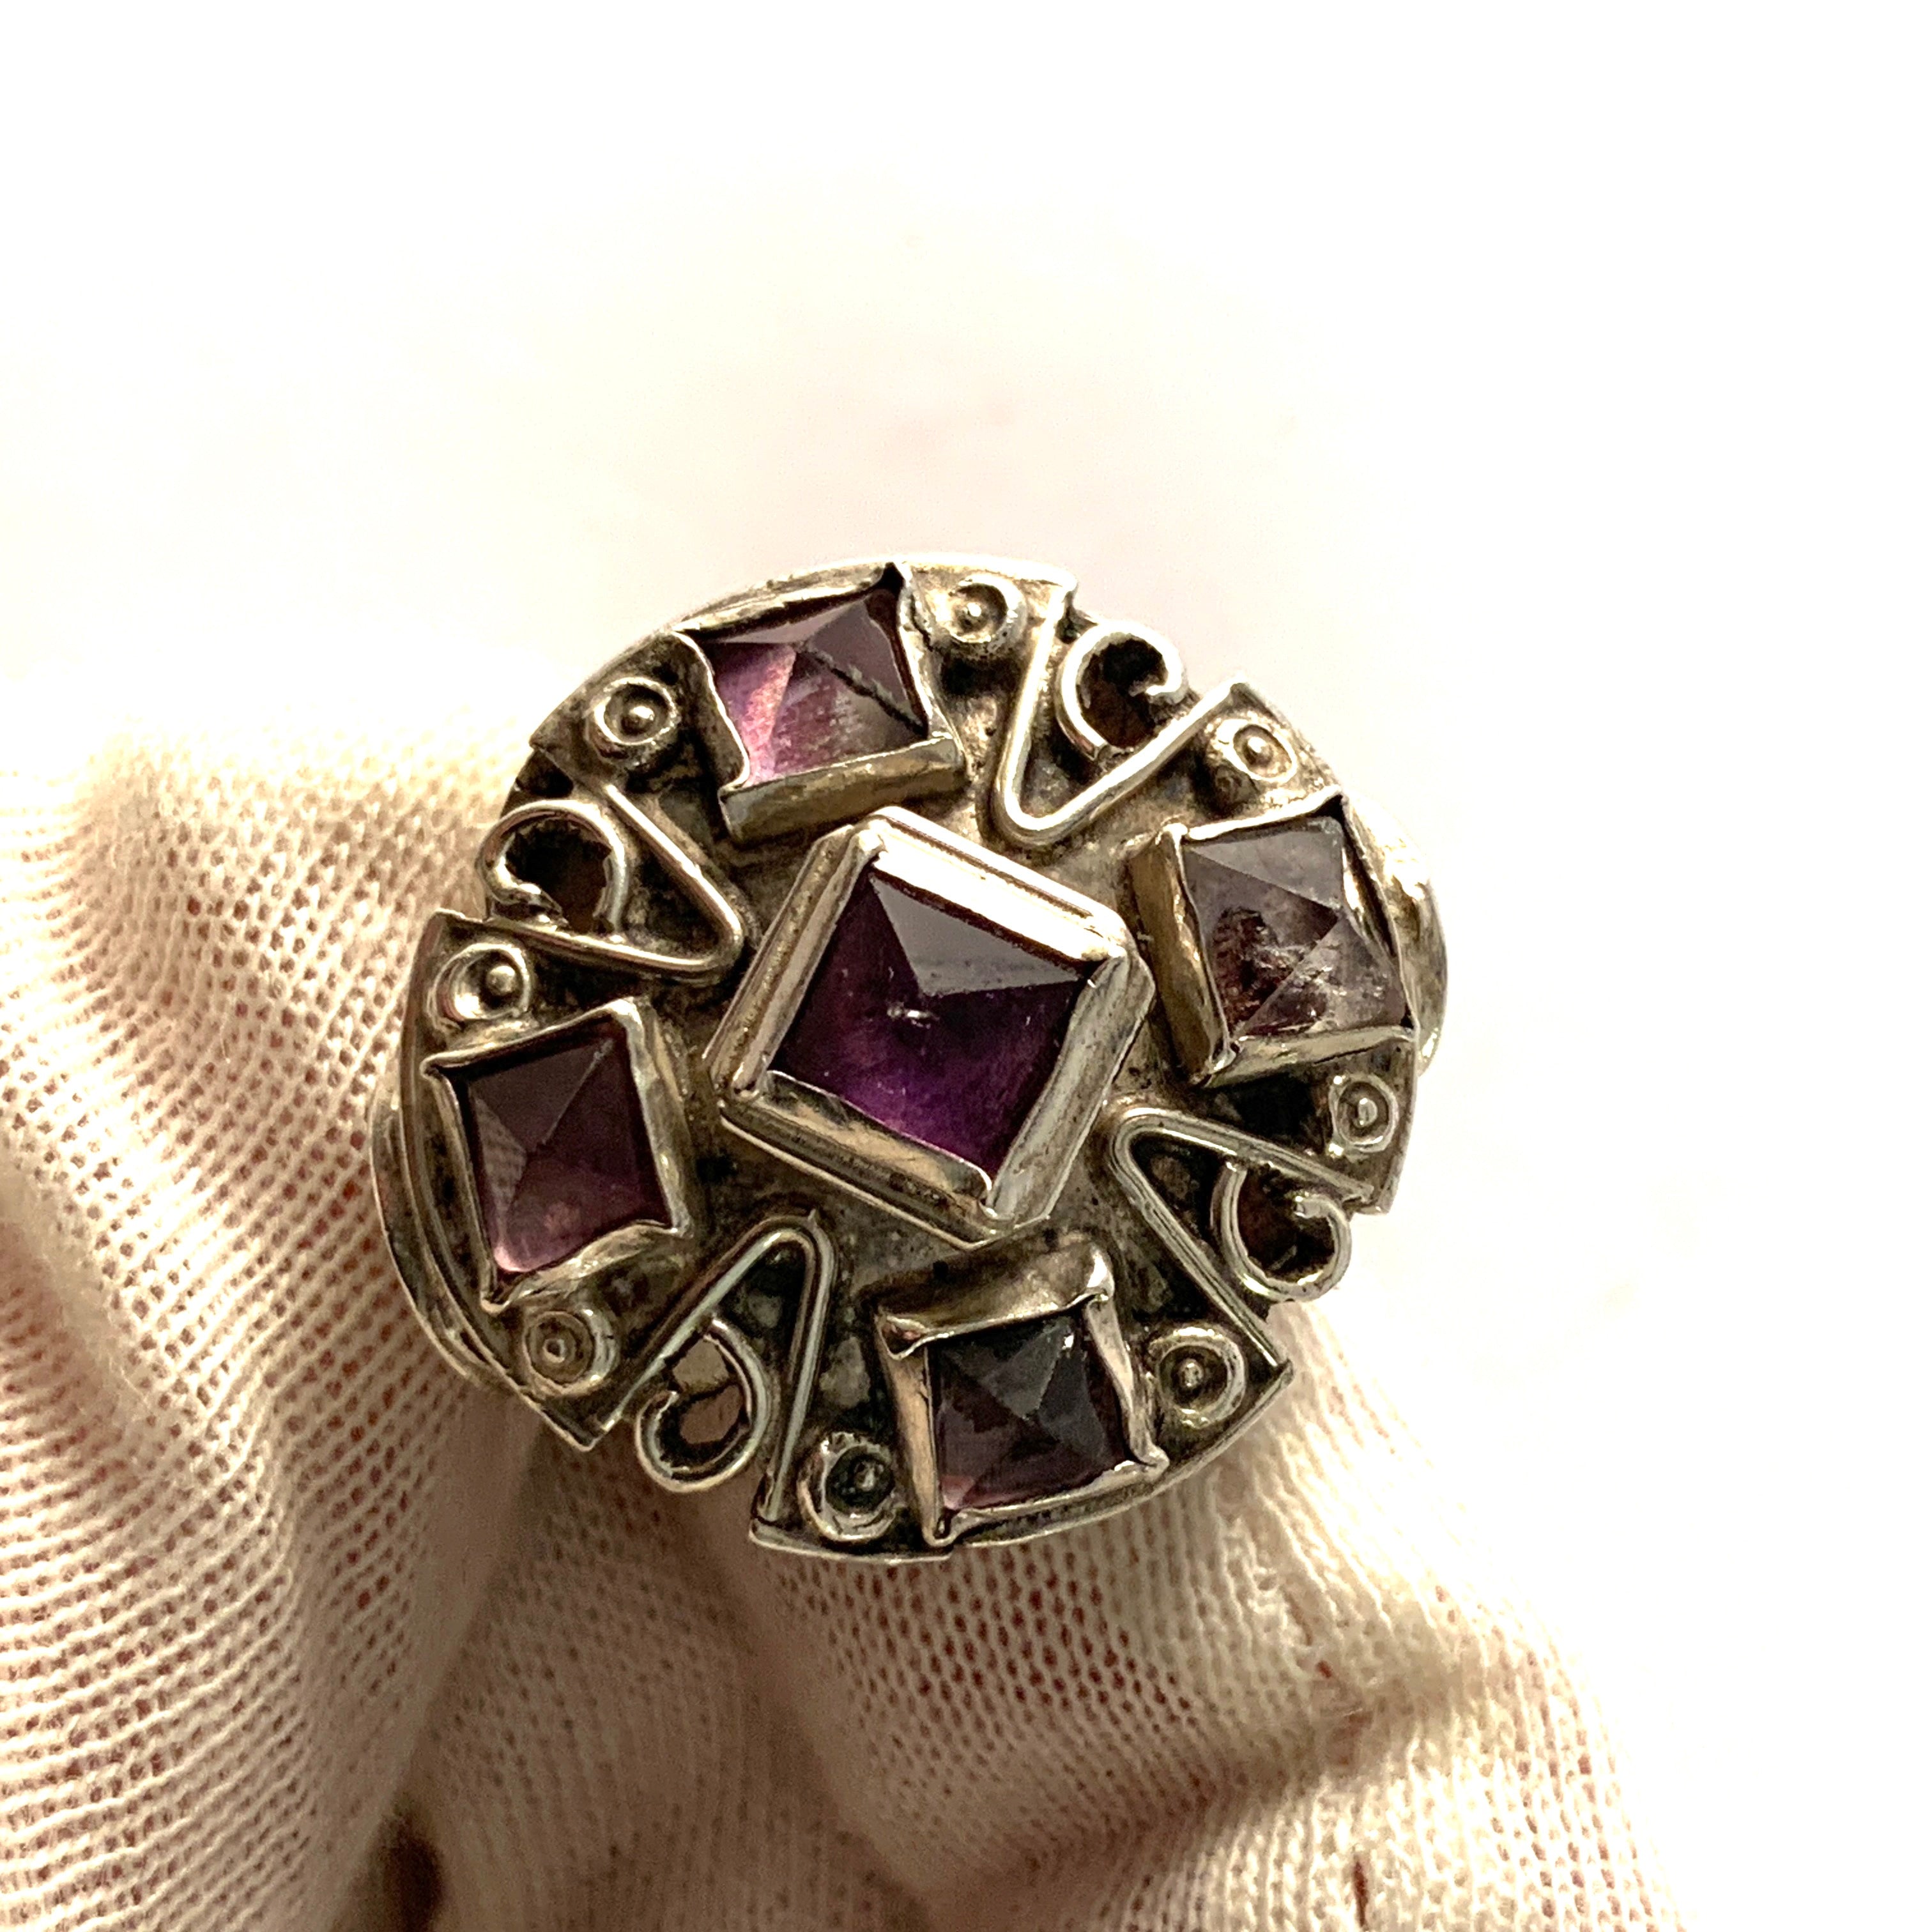 MATL Matilde Poulat, Mexico Vintage c 1950 Bold Sterling Silver Amethyst Ring